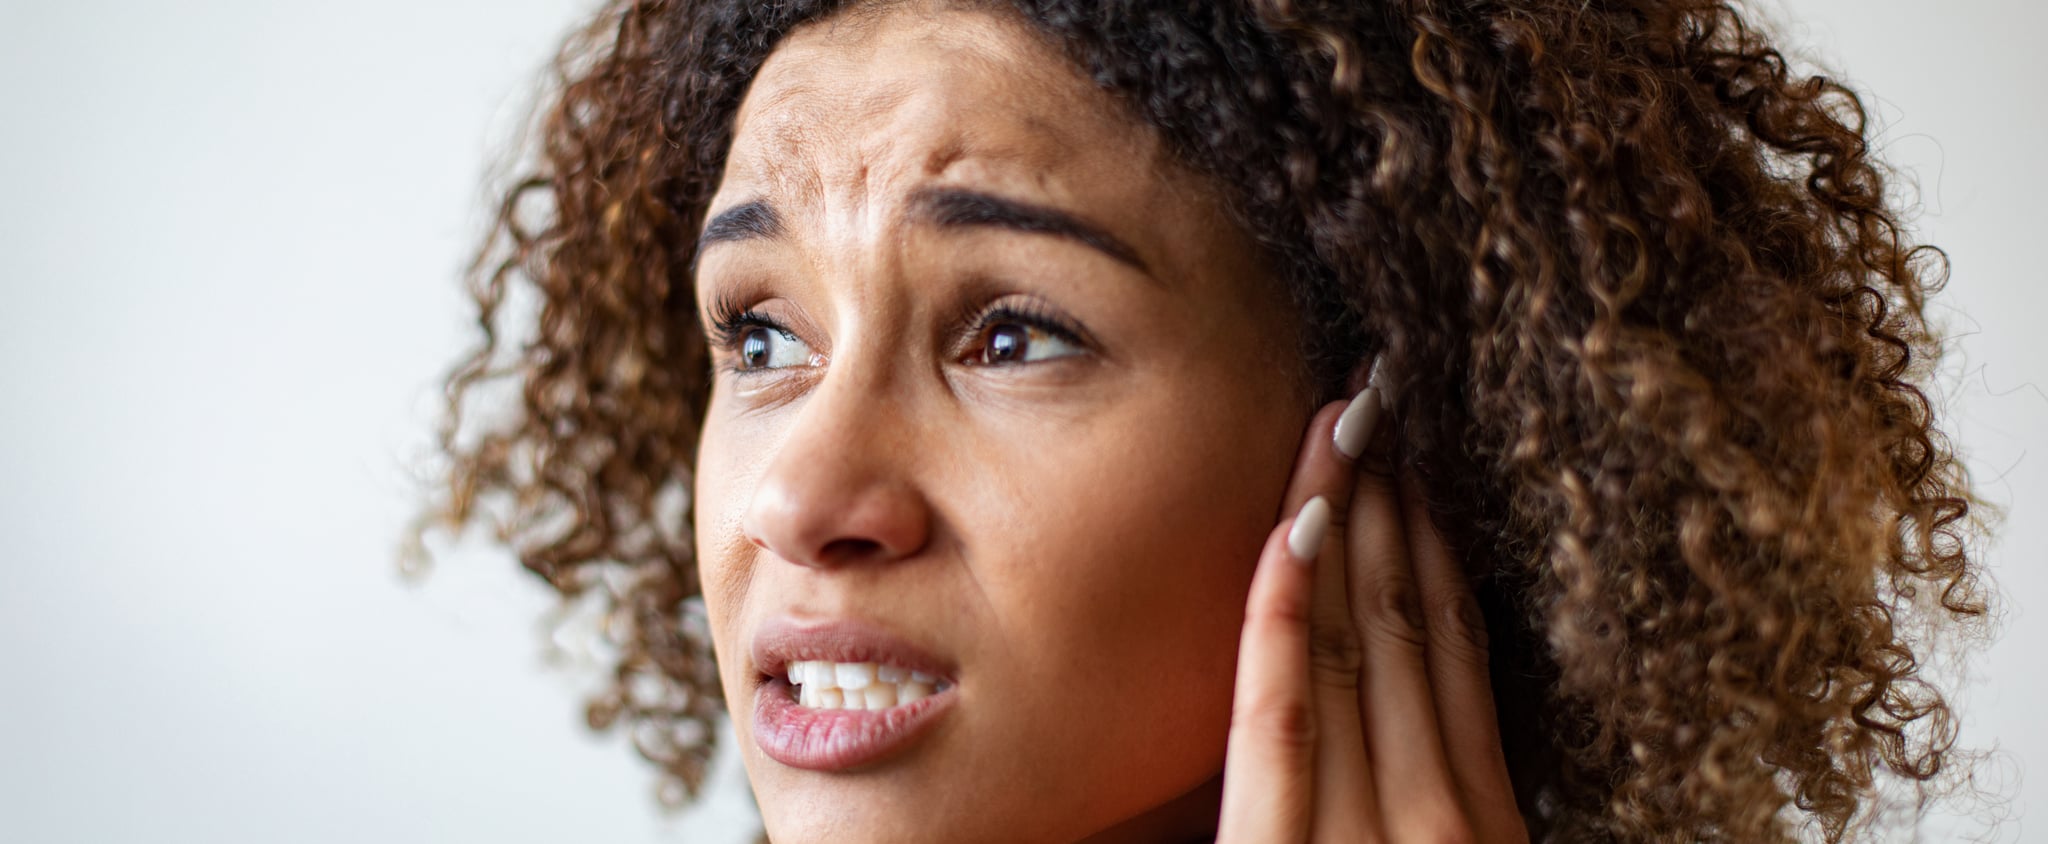 Why Are My Ears Itchy? A Doctor Weighs In